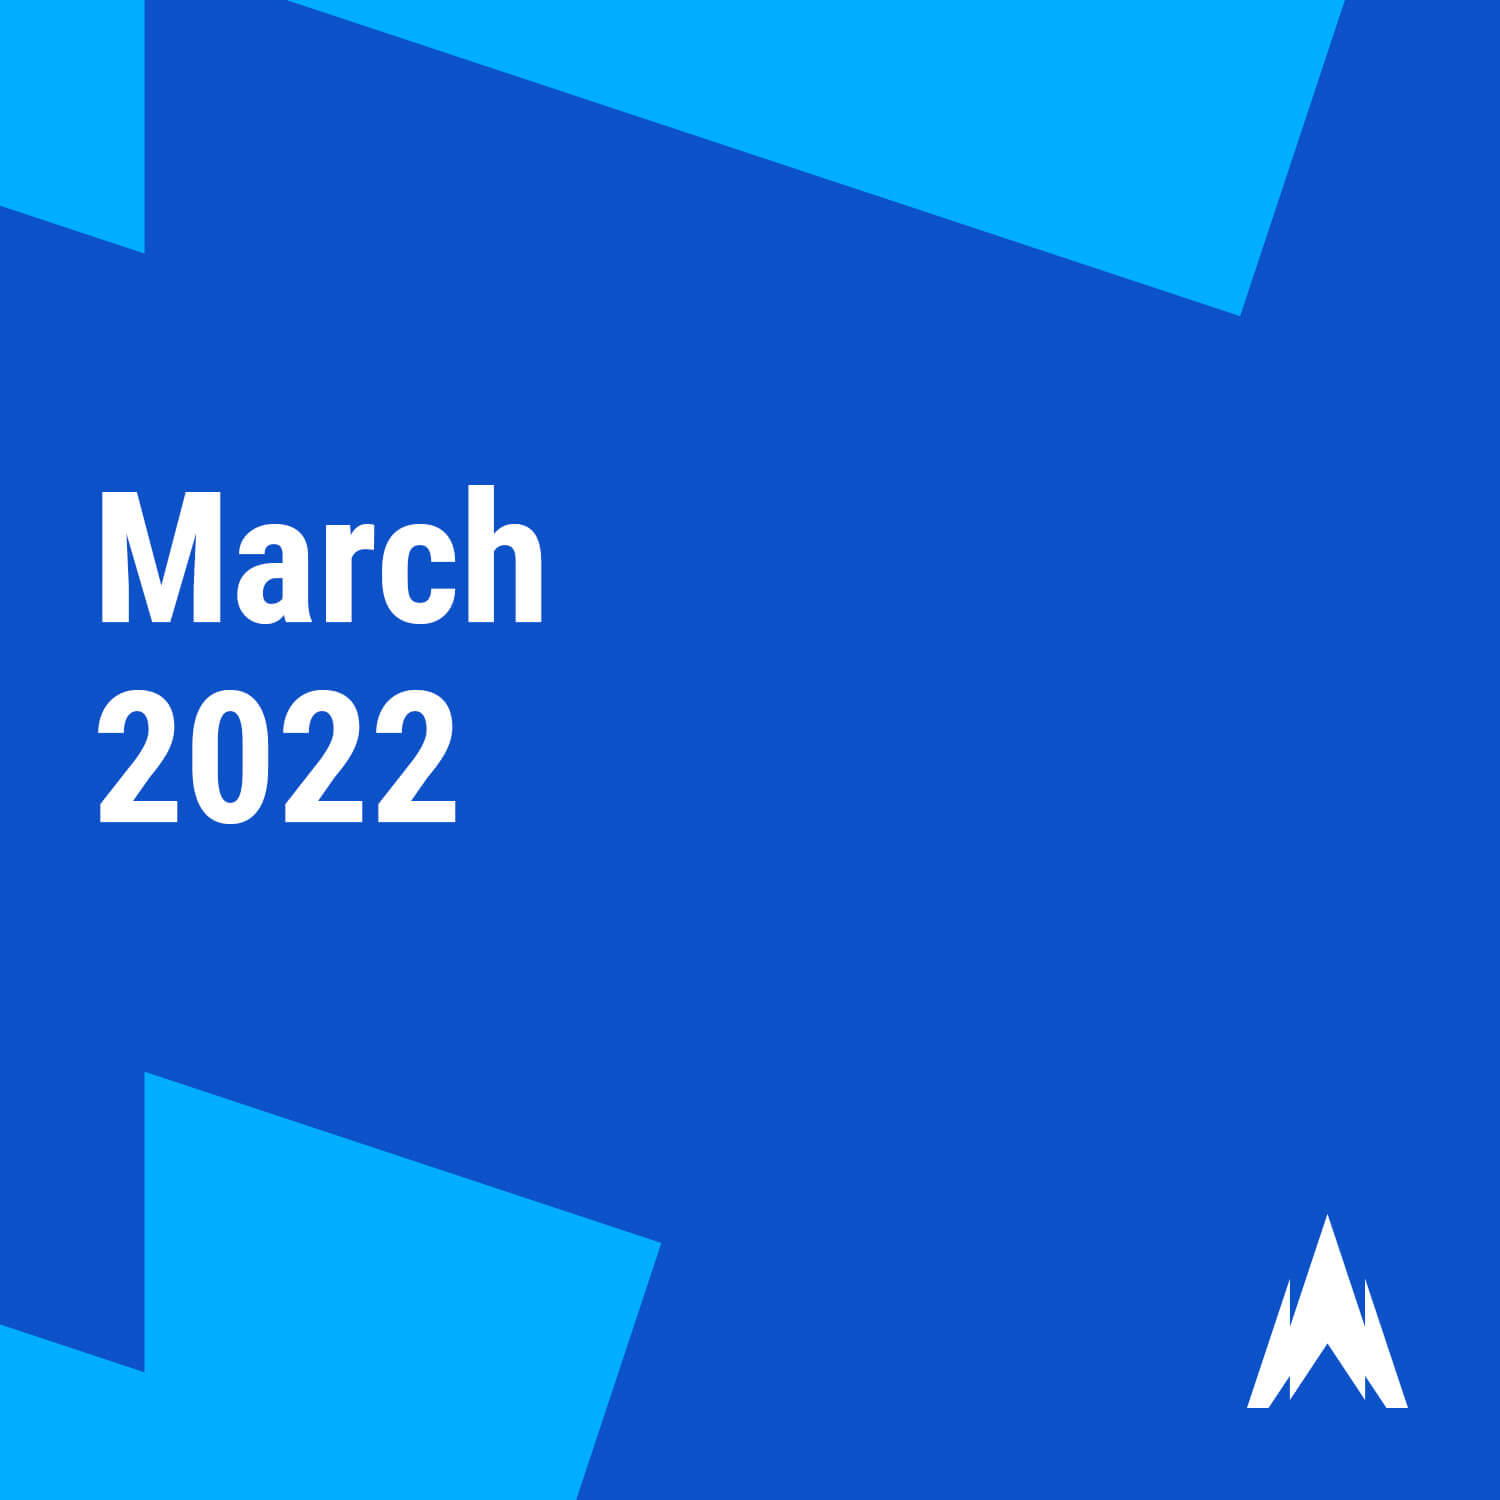 A Rise Media news thumbnail for the March 2022 Highlights article